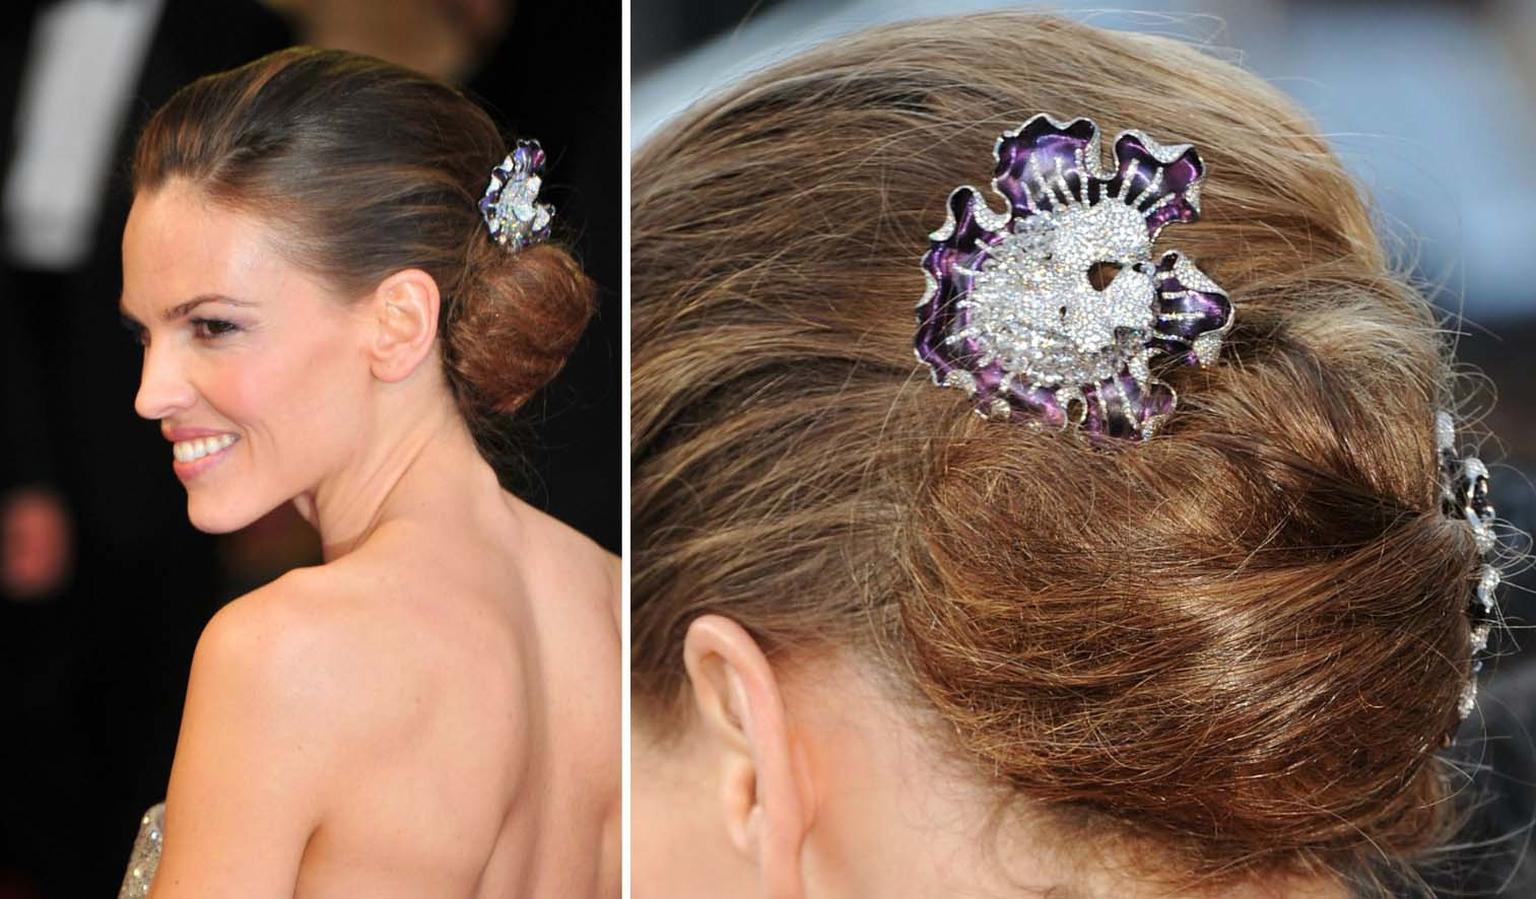 Hilary Swank wore a pair of Magic Orchid high jewellery earrings by Anna Hu as hair ornaments to the 2011 Oscars ceremony.